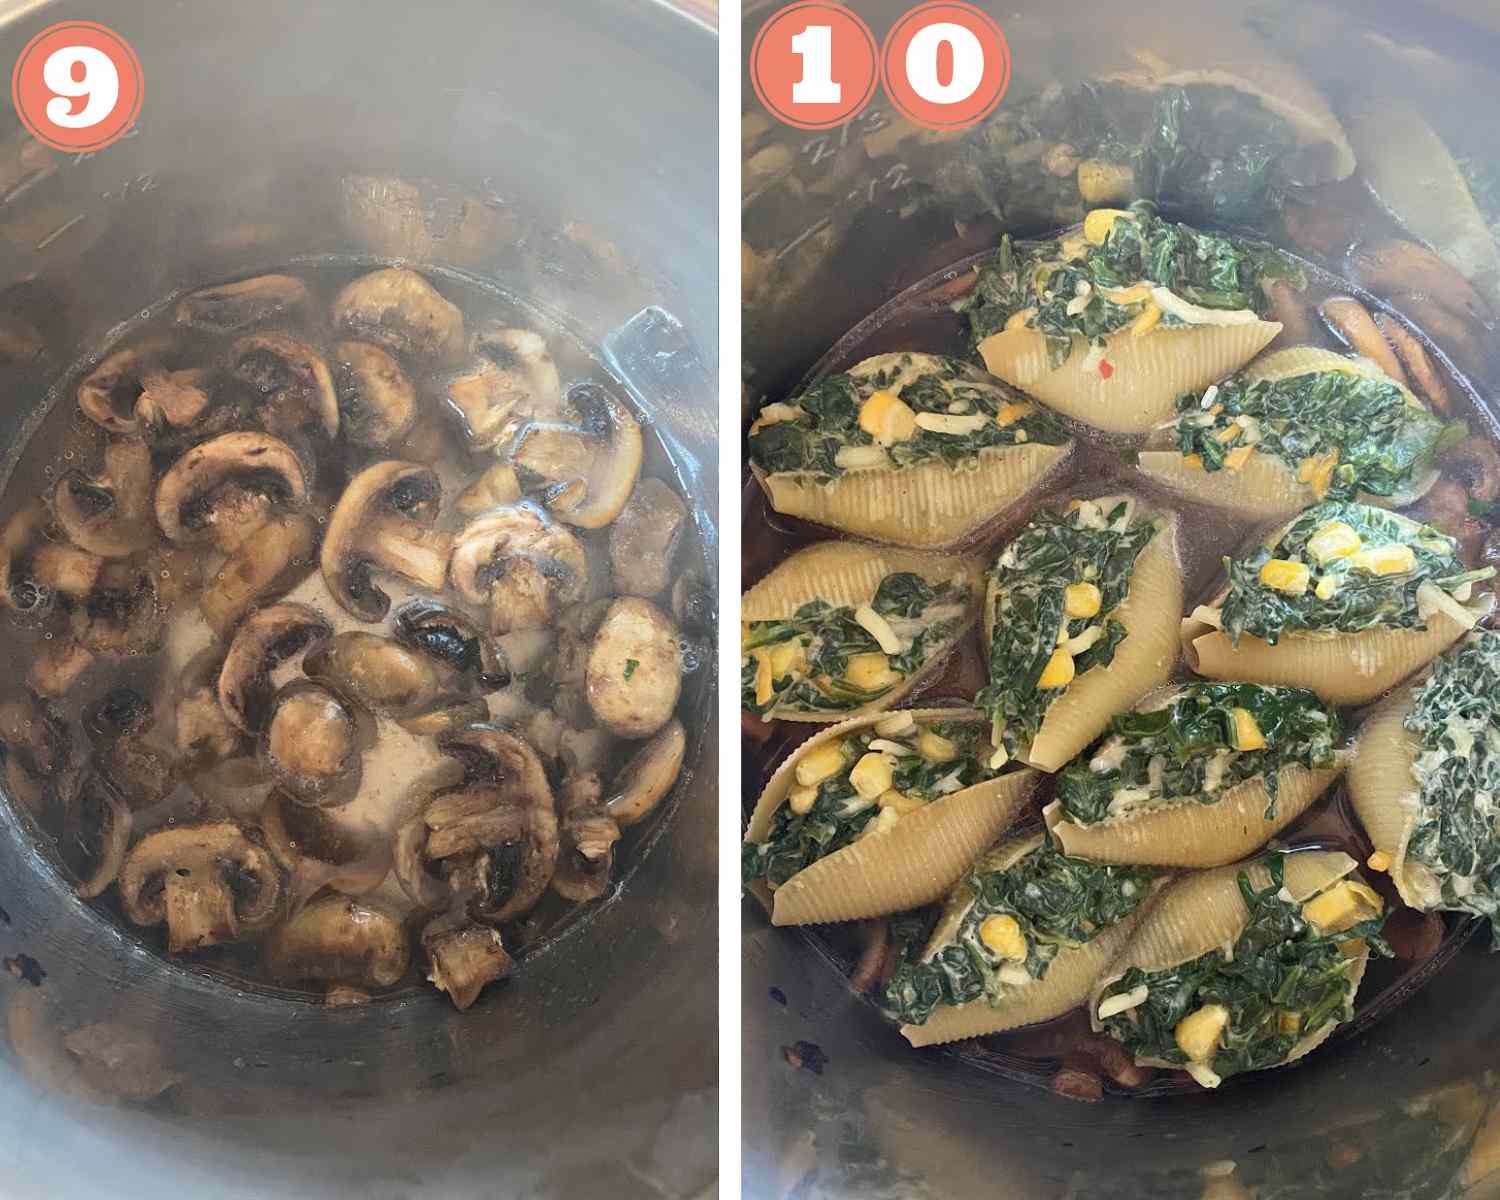 Collage steps to make instant pot stuffed shells; cooking mushrooms and adding stuffed shells to it. 